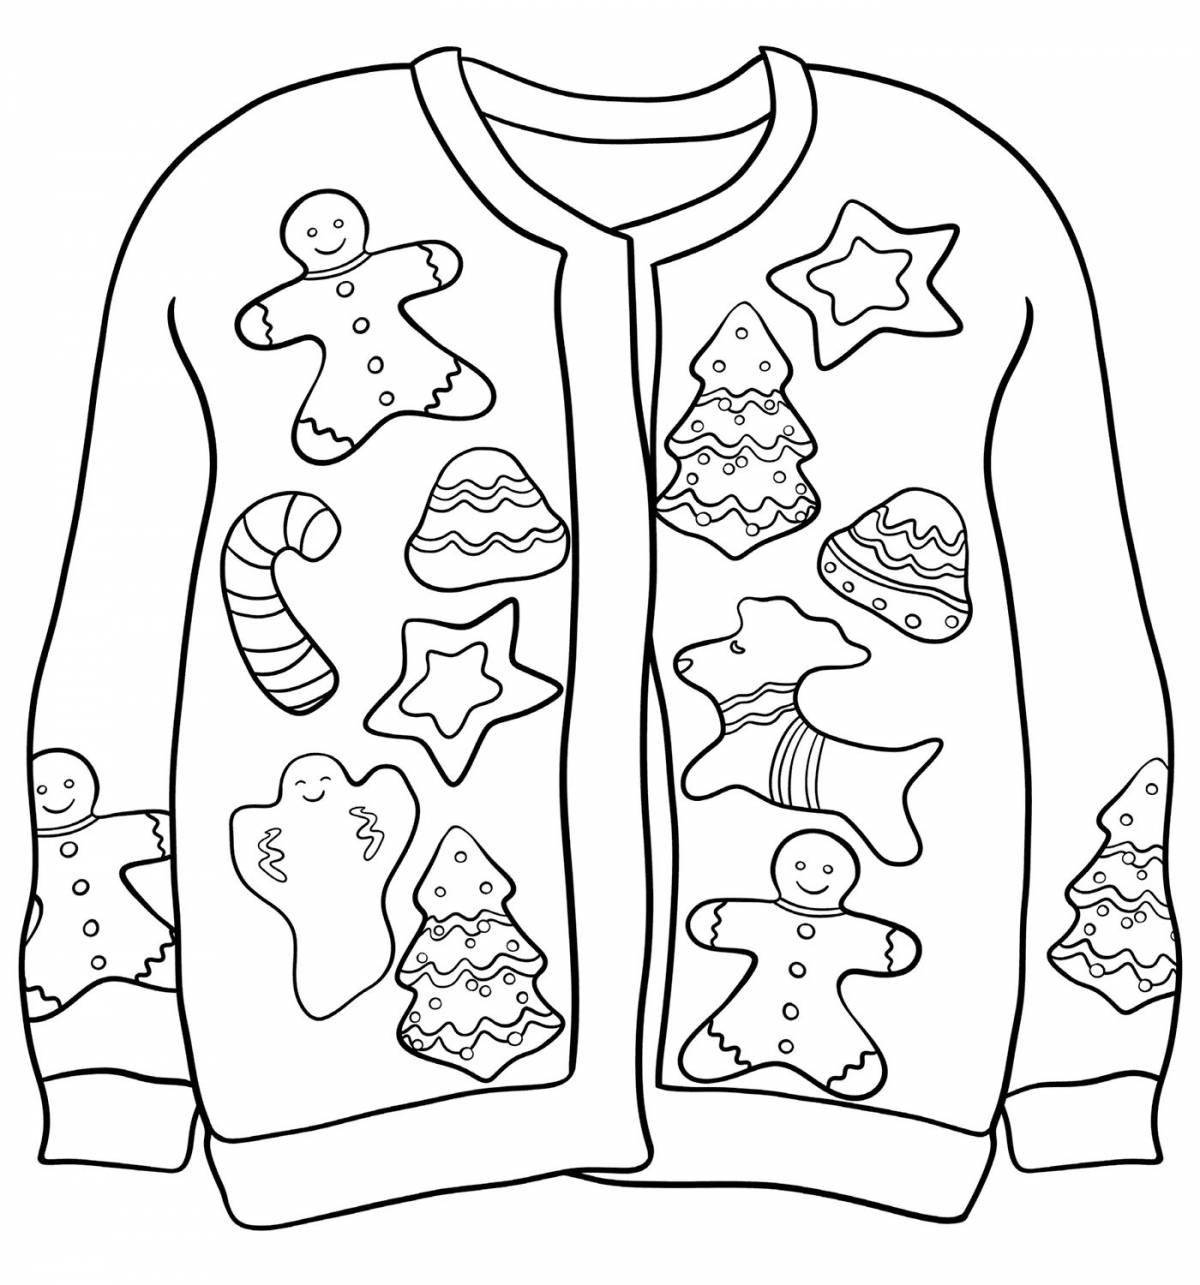 Coloring sweater with color filling for children